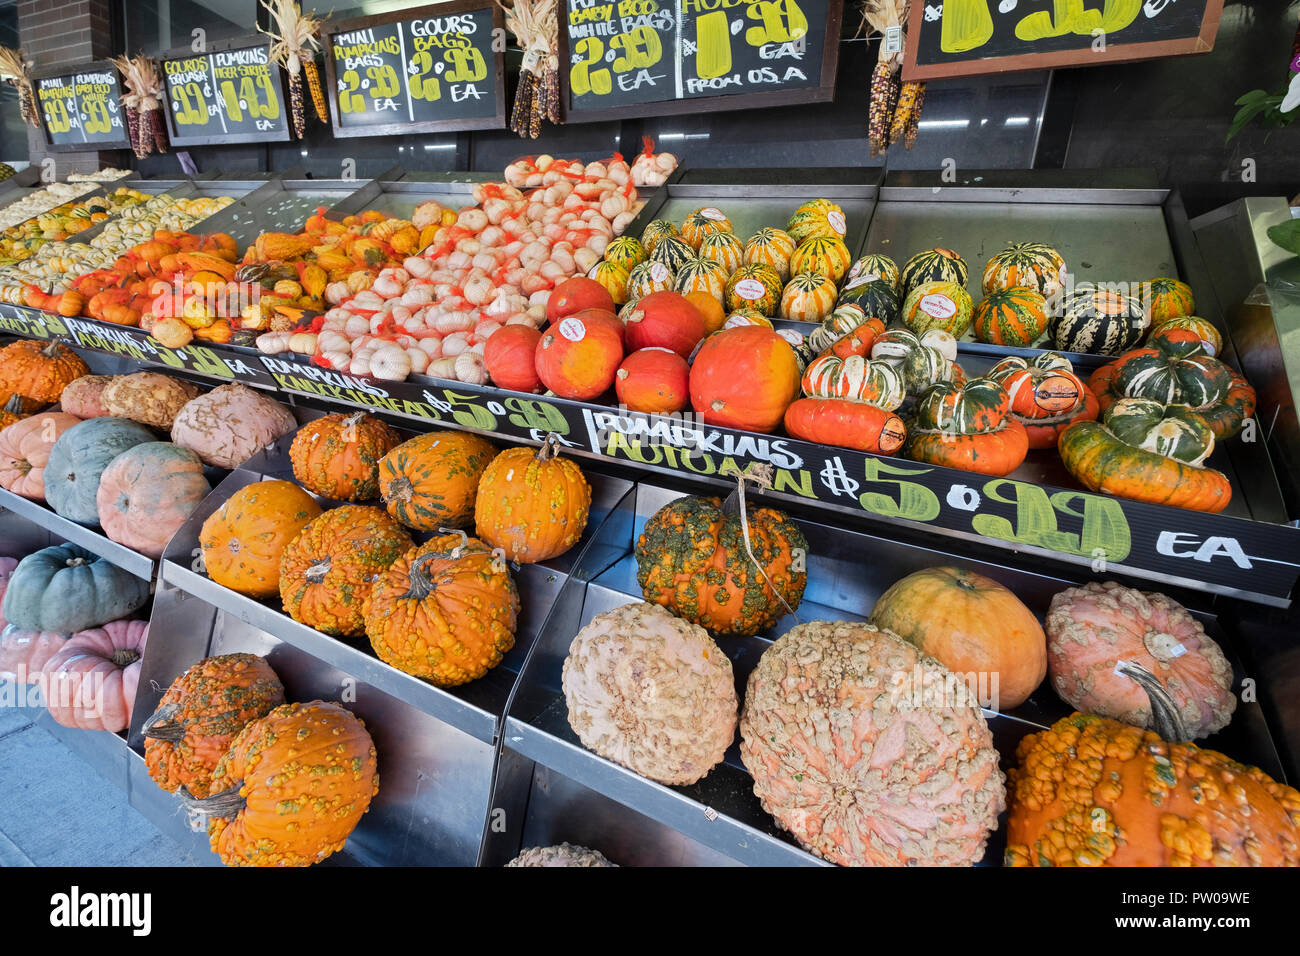 Pumpkins and gourds for sale at Westside Market on Third Avenue in Greenwich Village, Manhattan, New York City. Stock Photo